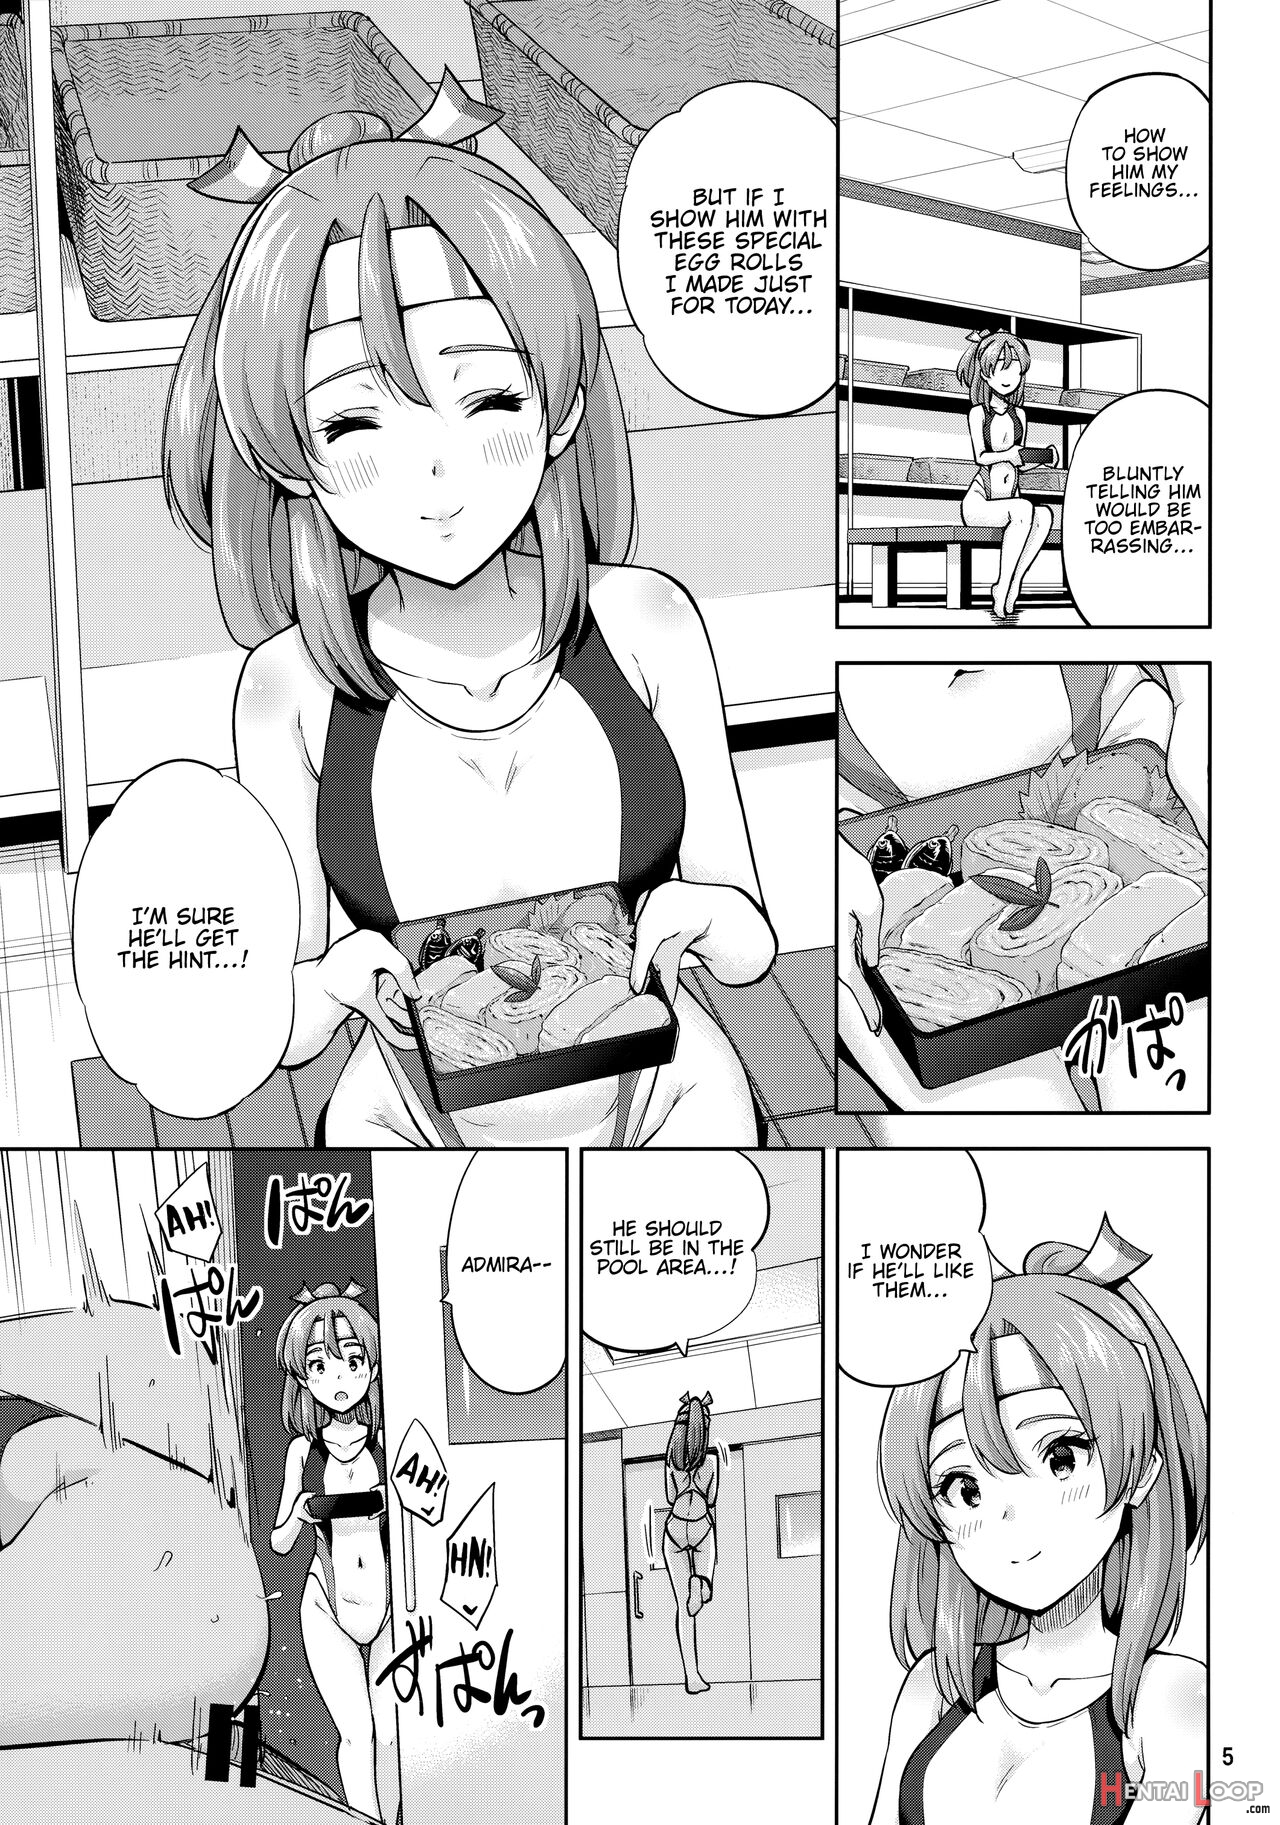 Zuihou And Hamakaze In Racing Swimsuits. page 7